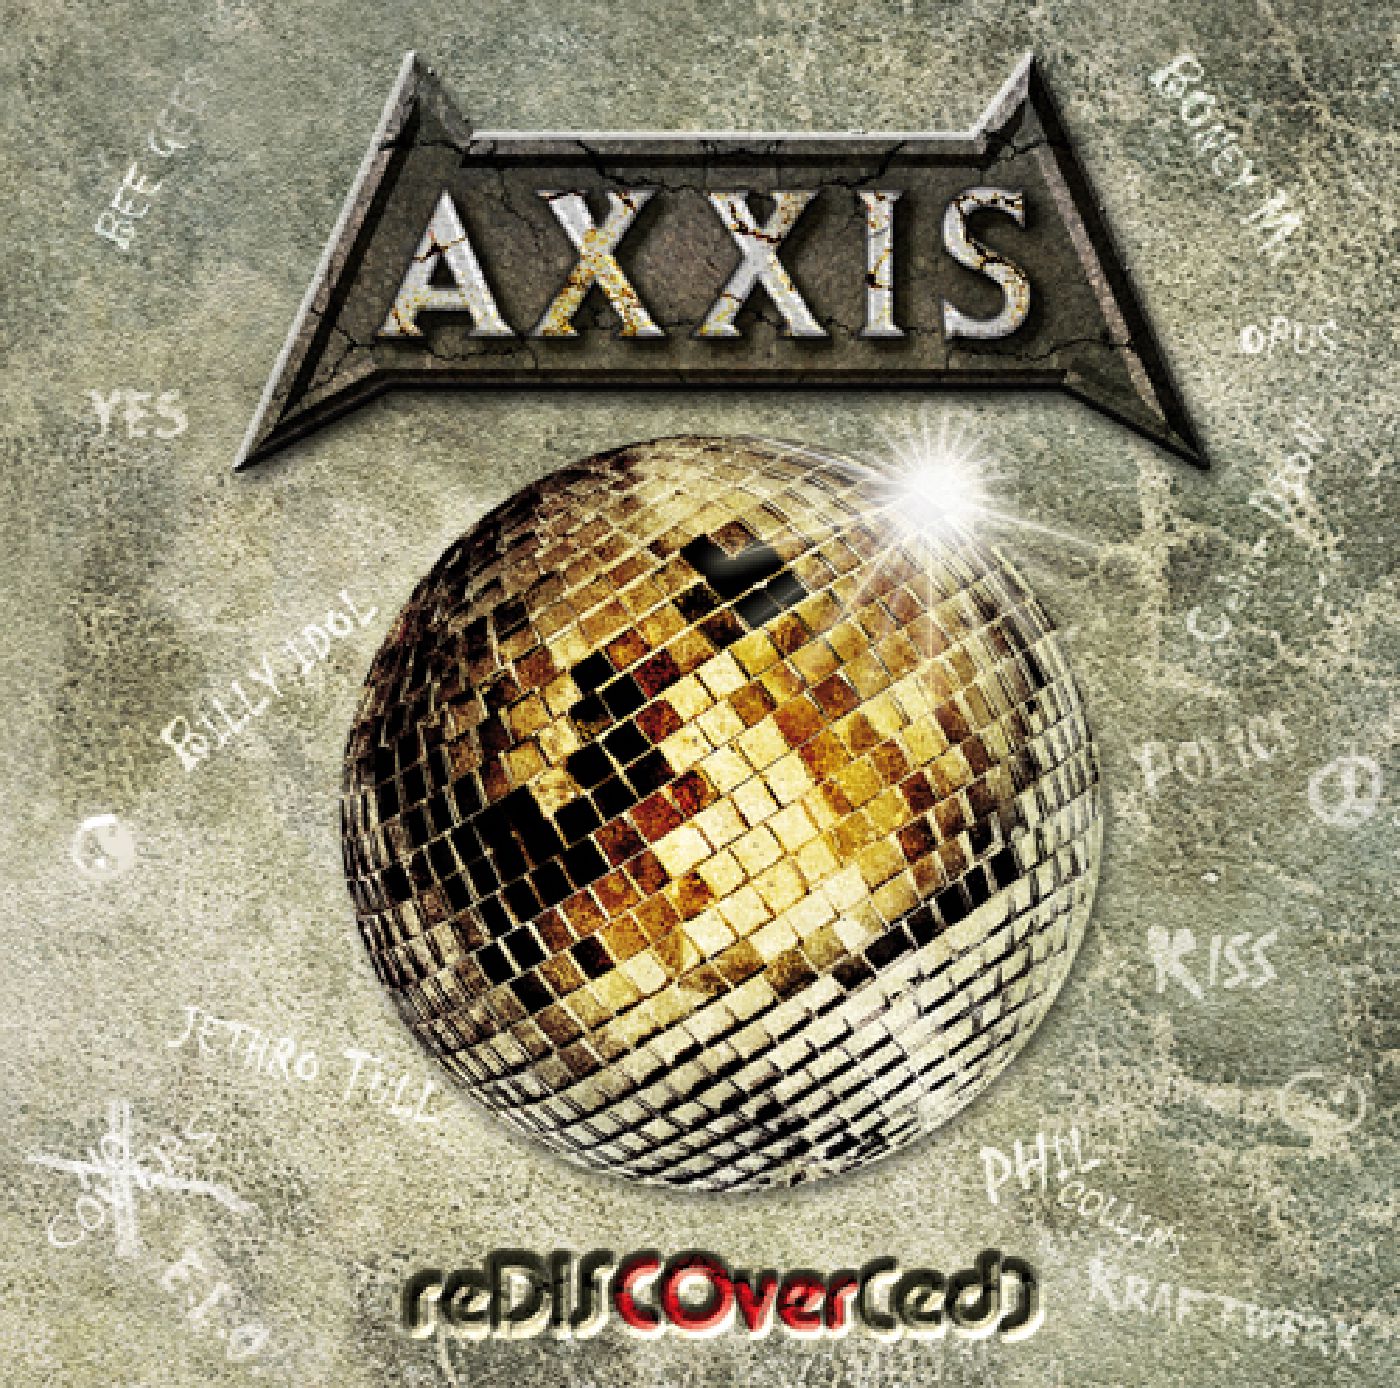 AXXIS reDISCOvered